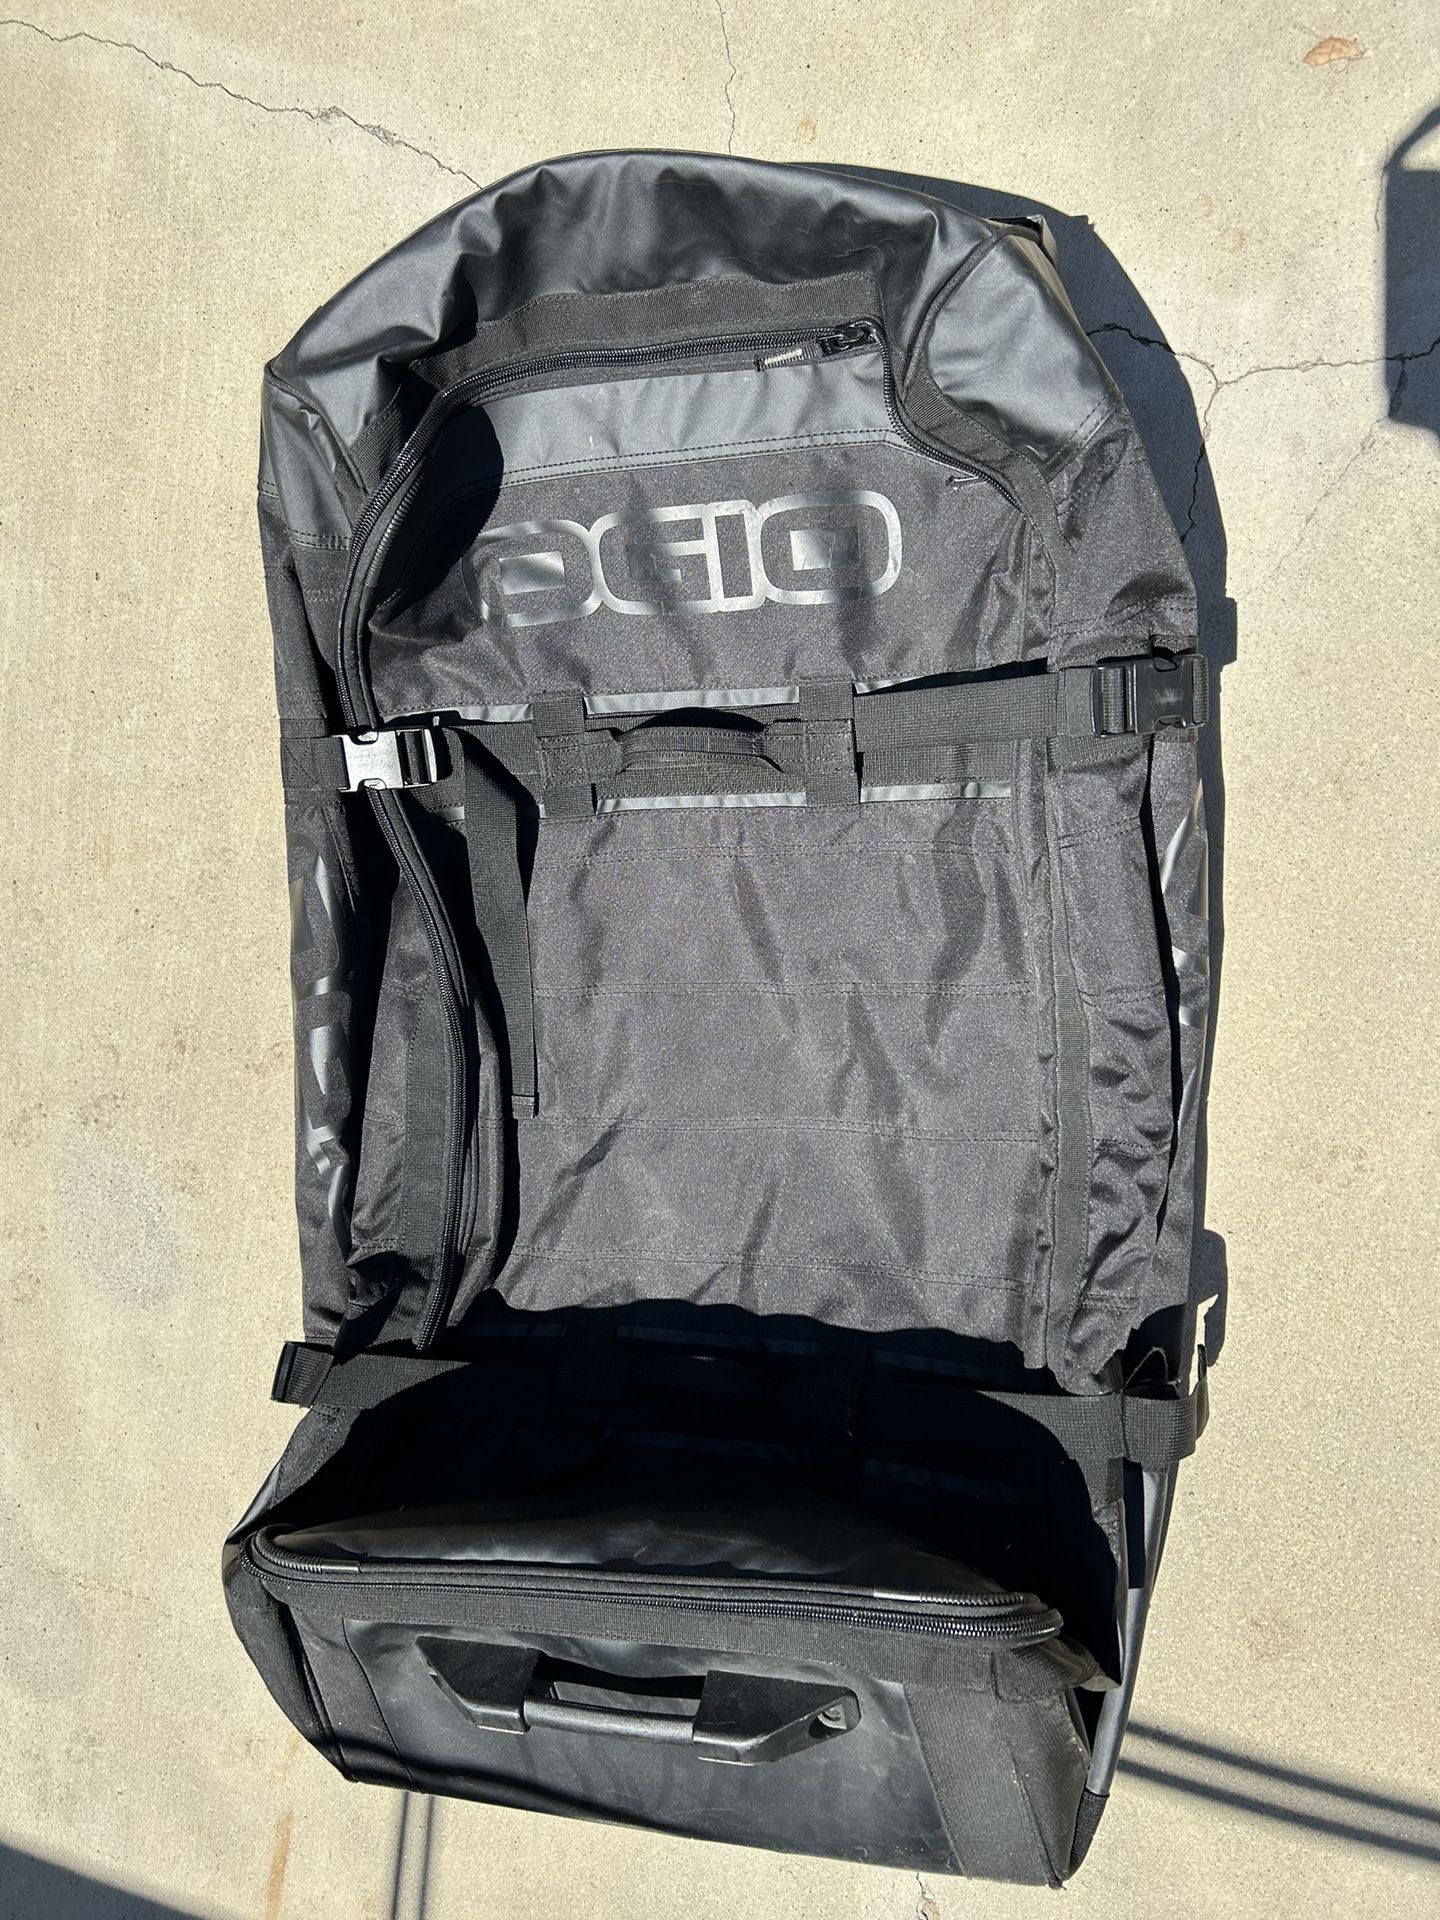 OGIO Travel Bag With Wheeels